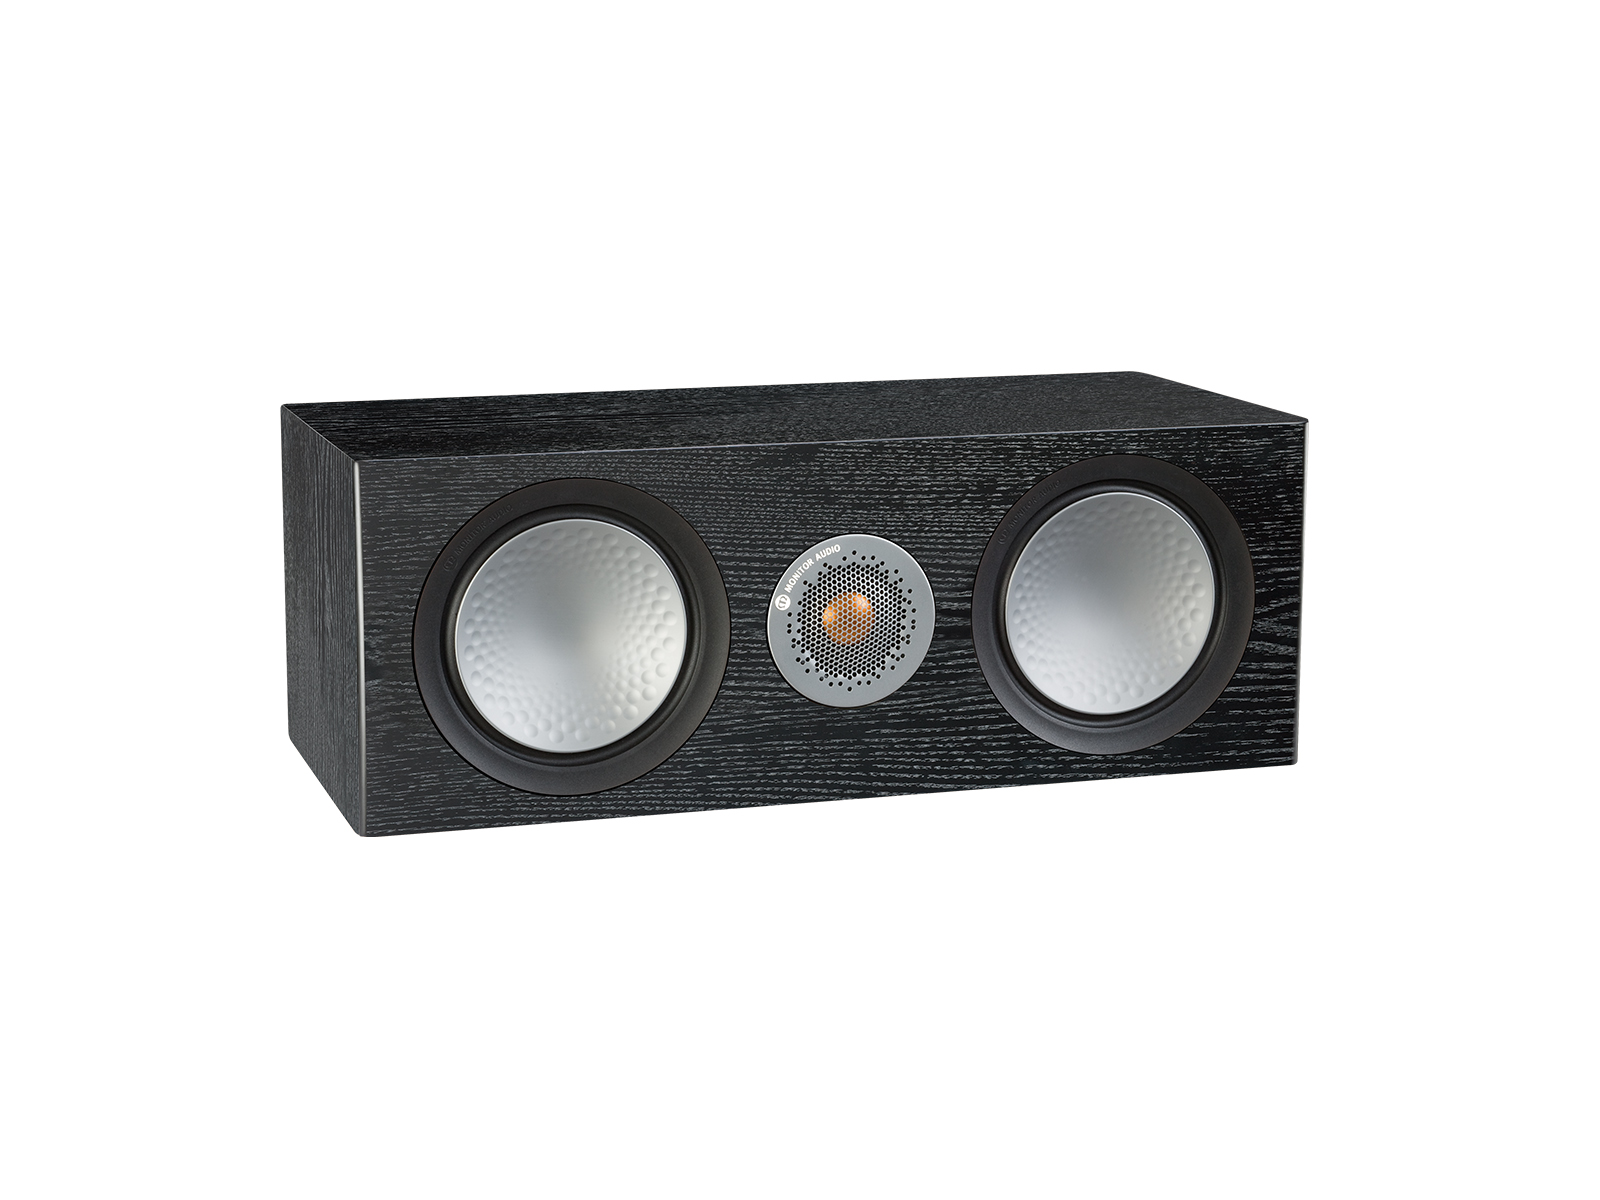 Silver C150, grille-less centre channel speakers, with a black oak finish.